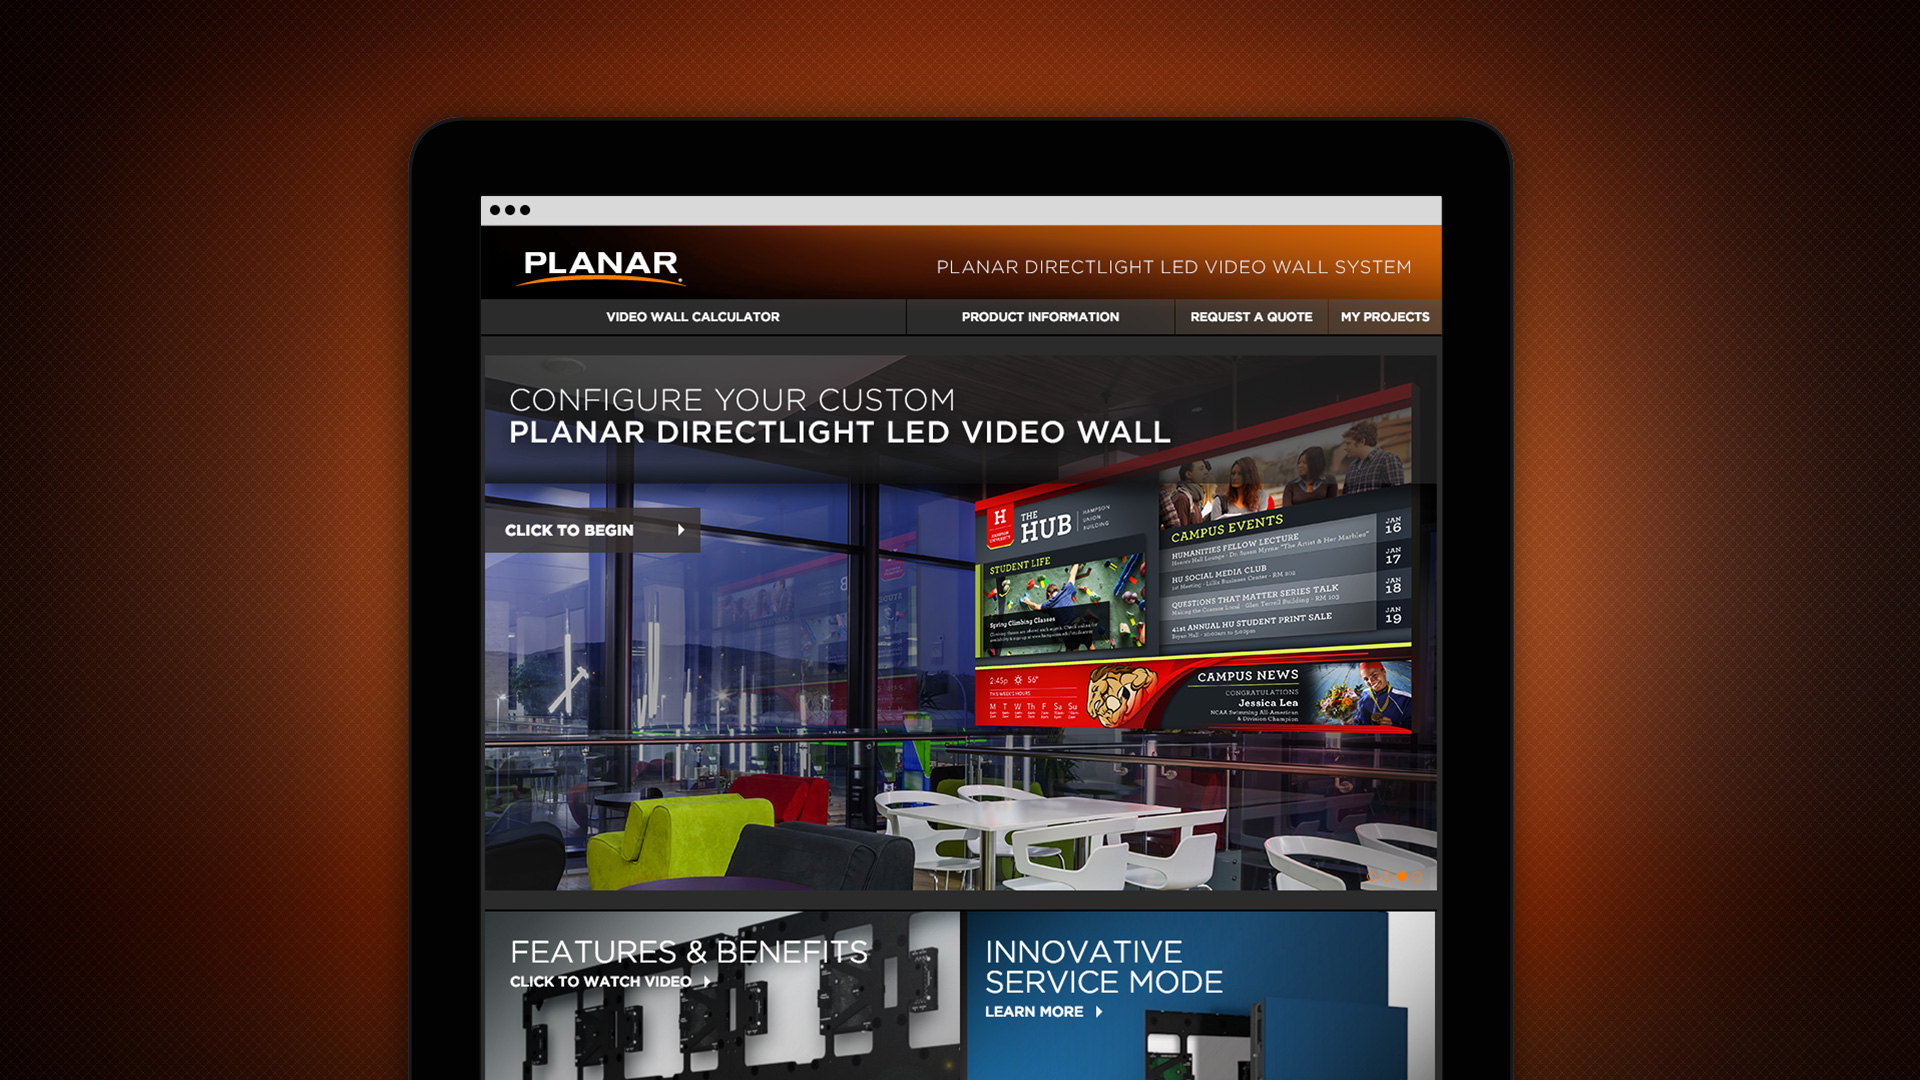 Planar Directlight Homepage screen on mobile device